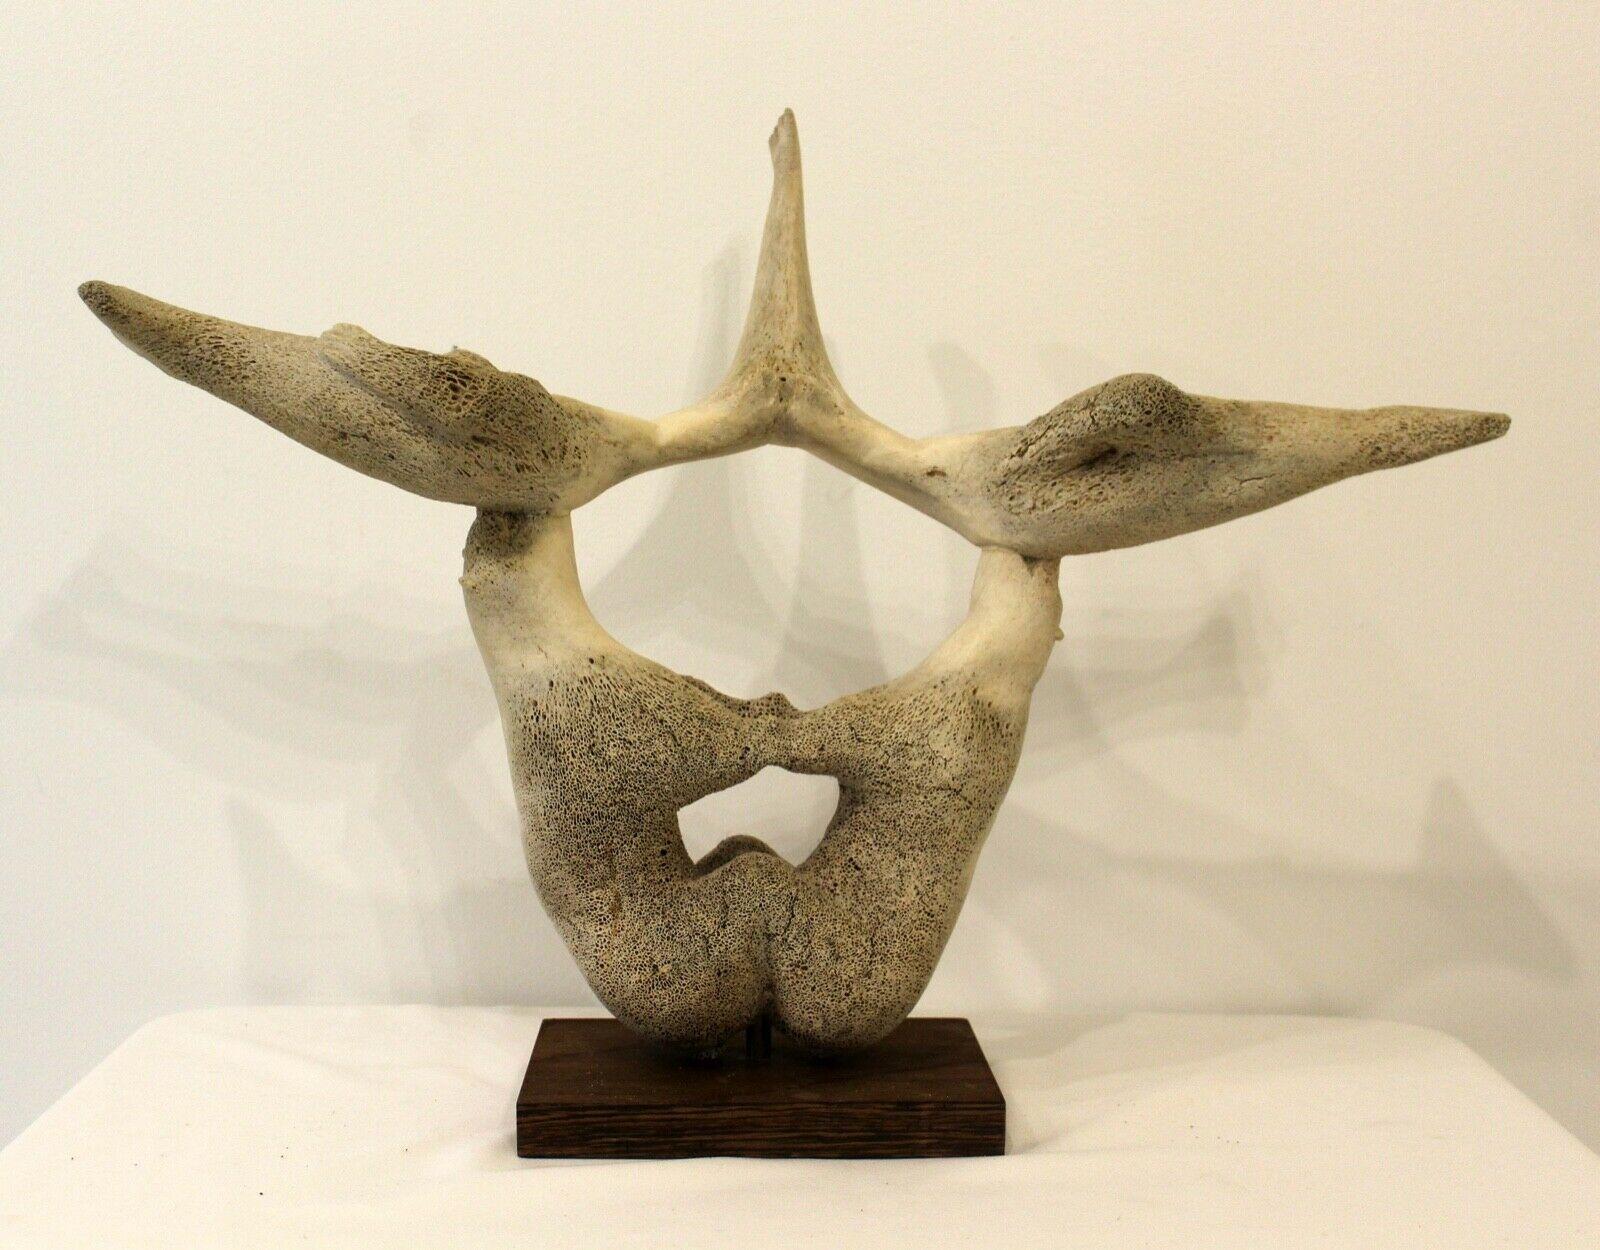 Antique Inuit Whale bone Sculpture. Very Unique Inuit unsigned sculpture. The artist utilized the unique shape of the bone to showcase 
the two mirrored polar bears balancing the two seals in a very simple stylized manner. 

Dimensions: 25.5w x